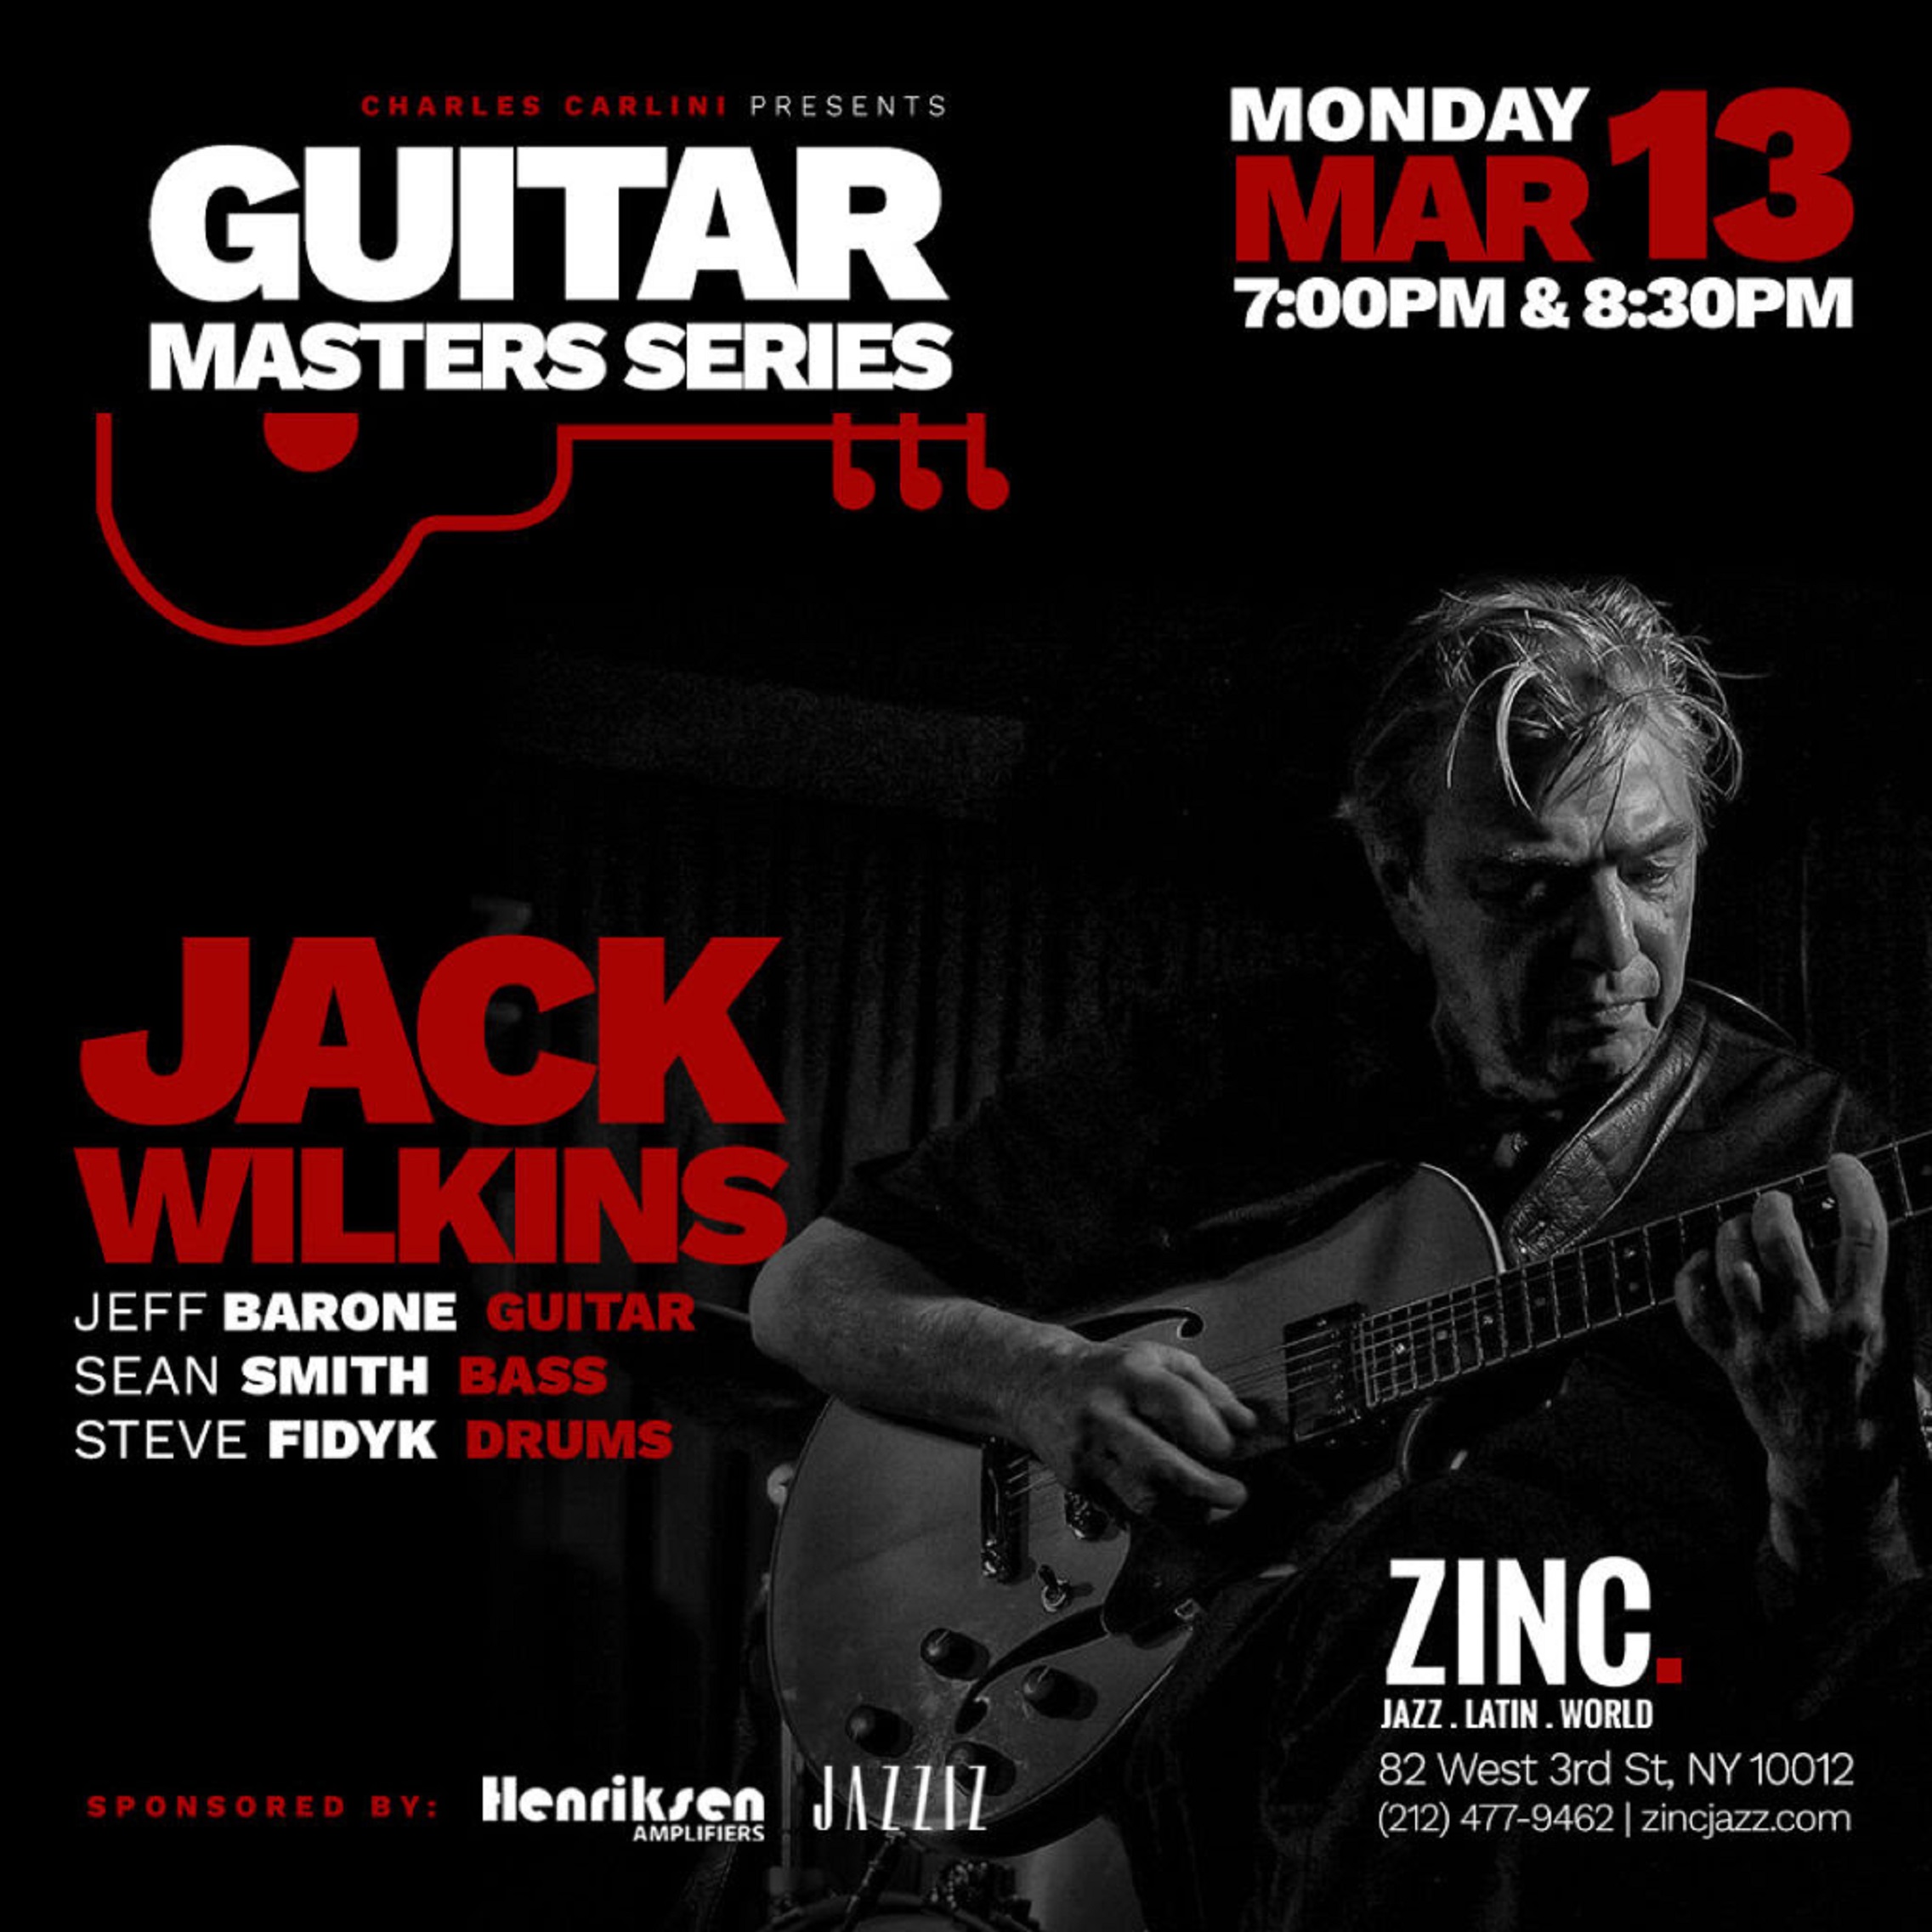 Acclaimed jazz guitarist Jack Wilkins brings his formidable trio to Zinc on Monday, March 13